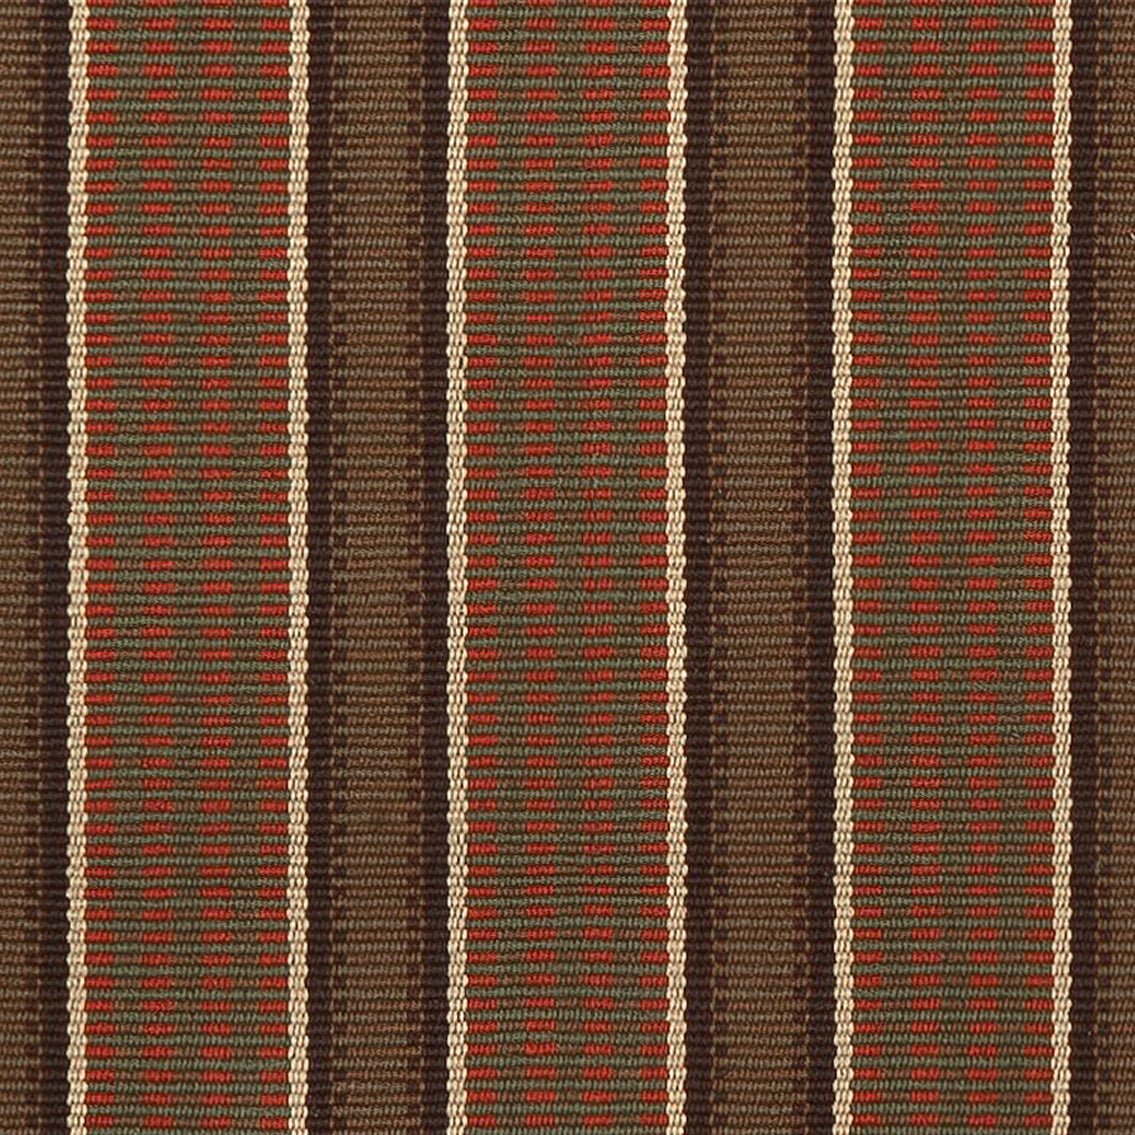 Randolph #271-D is a rich, vertical stripe design featuring cocoa, pumpkin, green, mushroom and tan stripes. Practical and beautiful on stairs or as a hallway runner, this design can also be seamed to any size for room size area rugs.